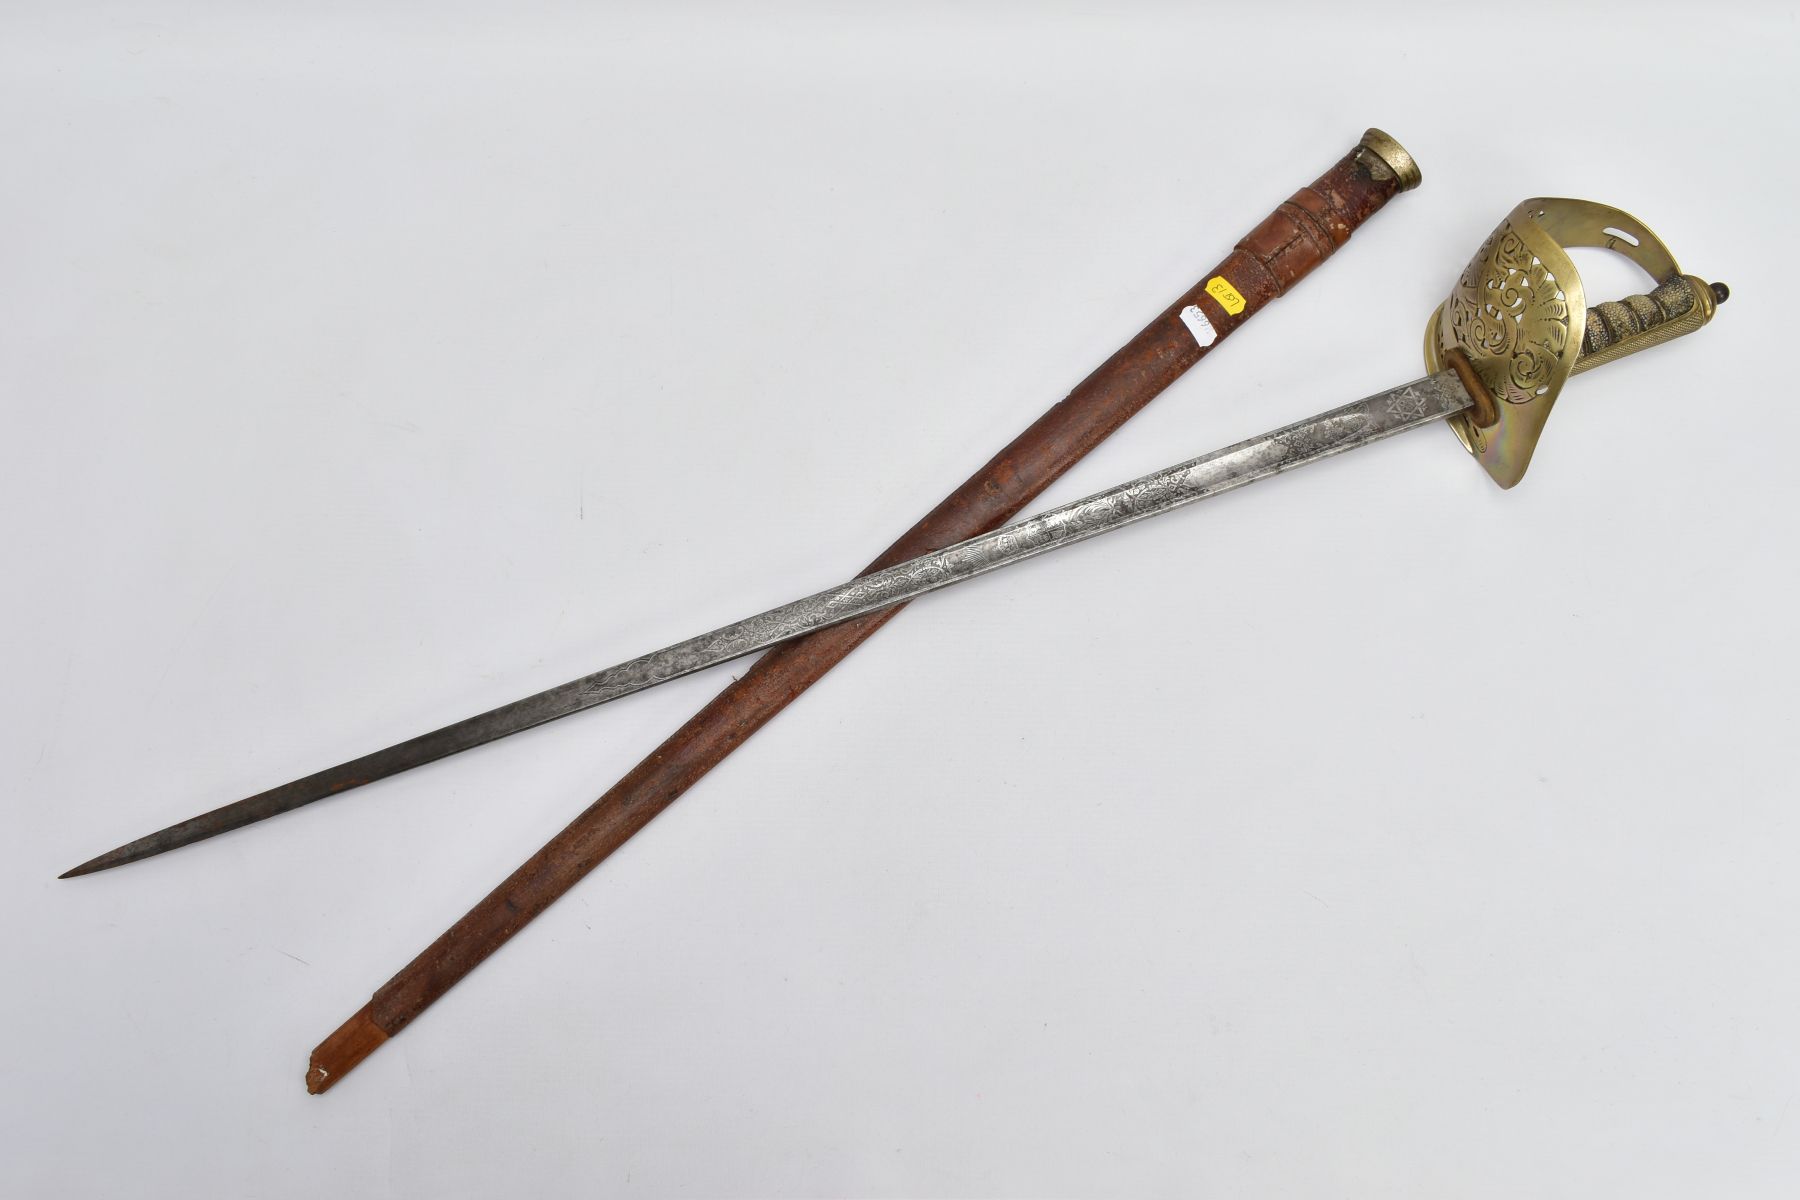 A FENTON BROTHERS LTD, SHEFFIELD 1897 PATTERN INFANTRY OFFICERS SWORD AND SCABBARD, the blade is